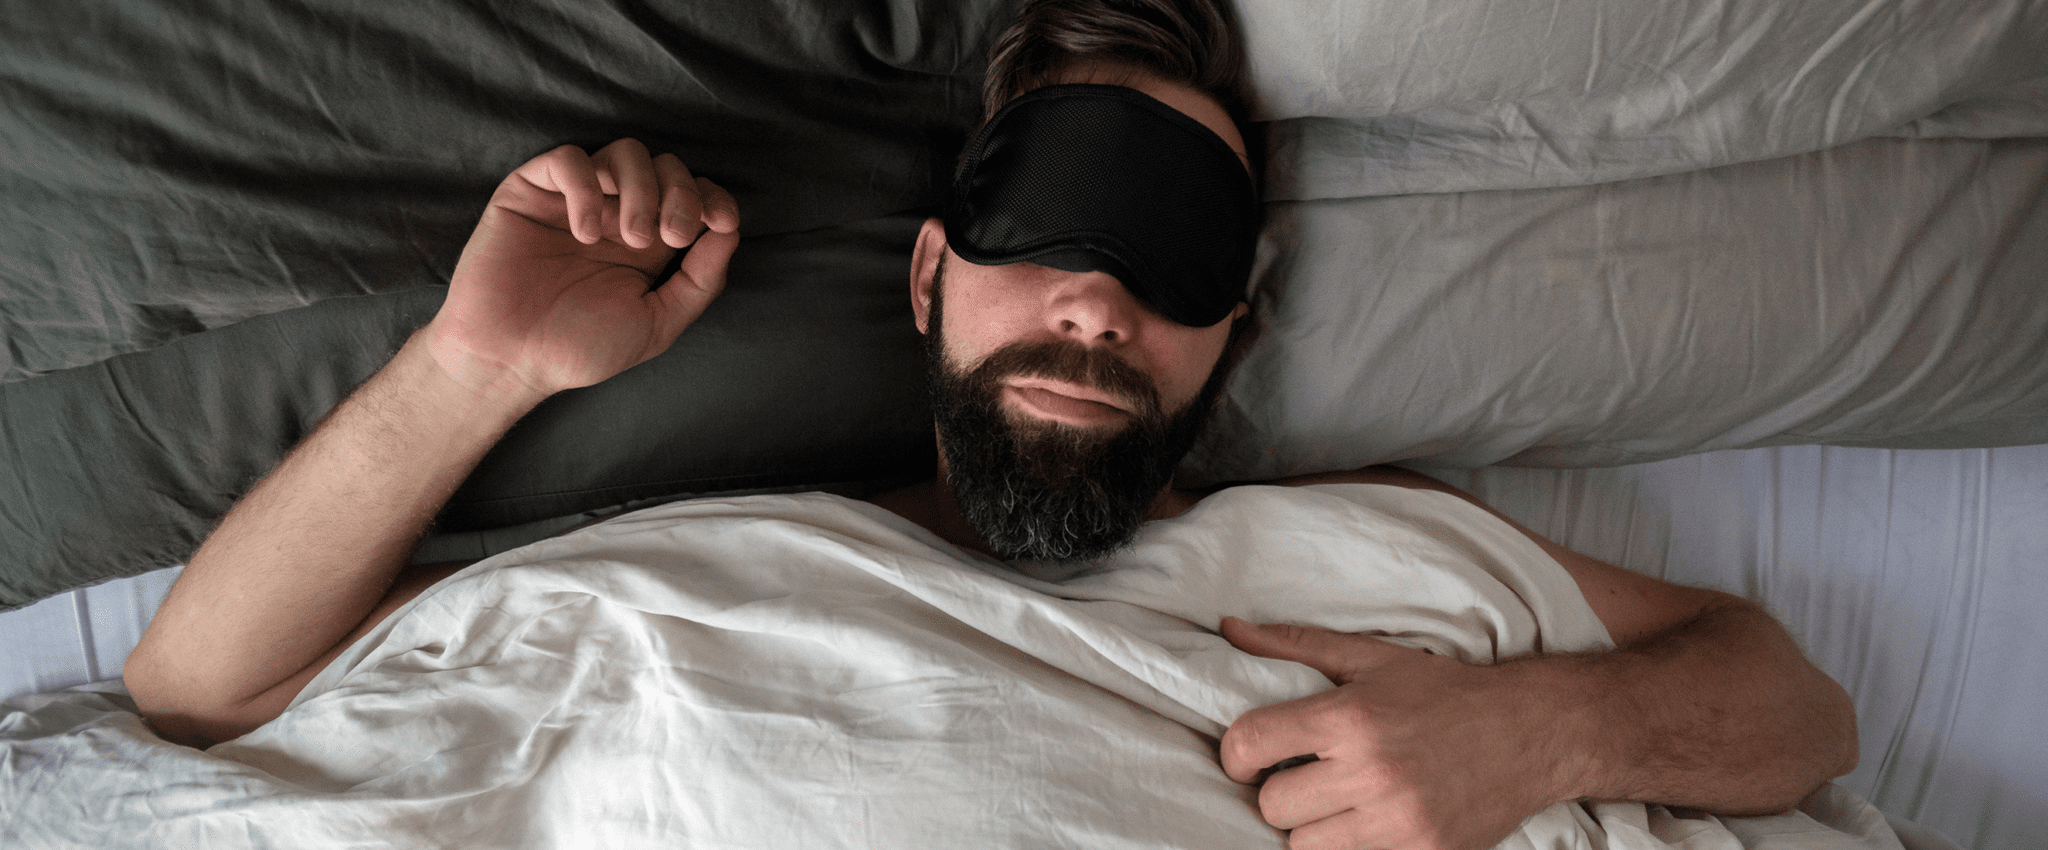 Take Your Sleep Quality to the Next Level With These 10 Weighted Sleep Masks